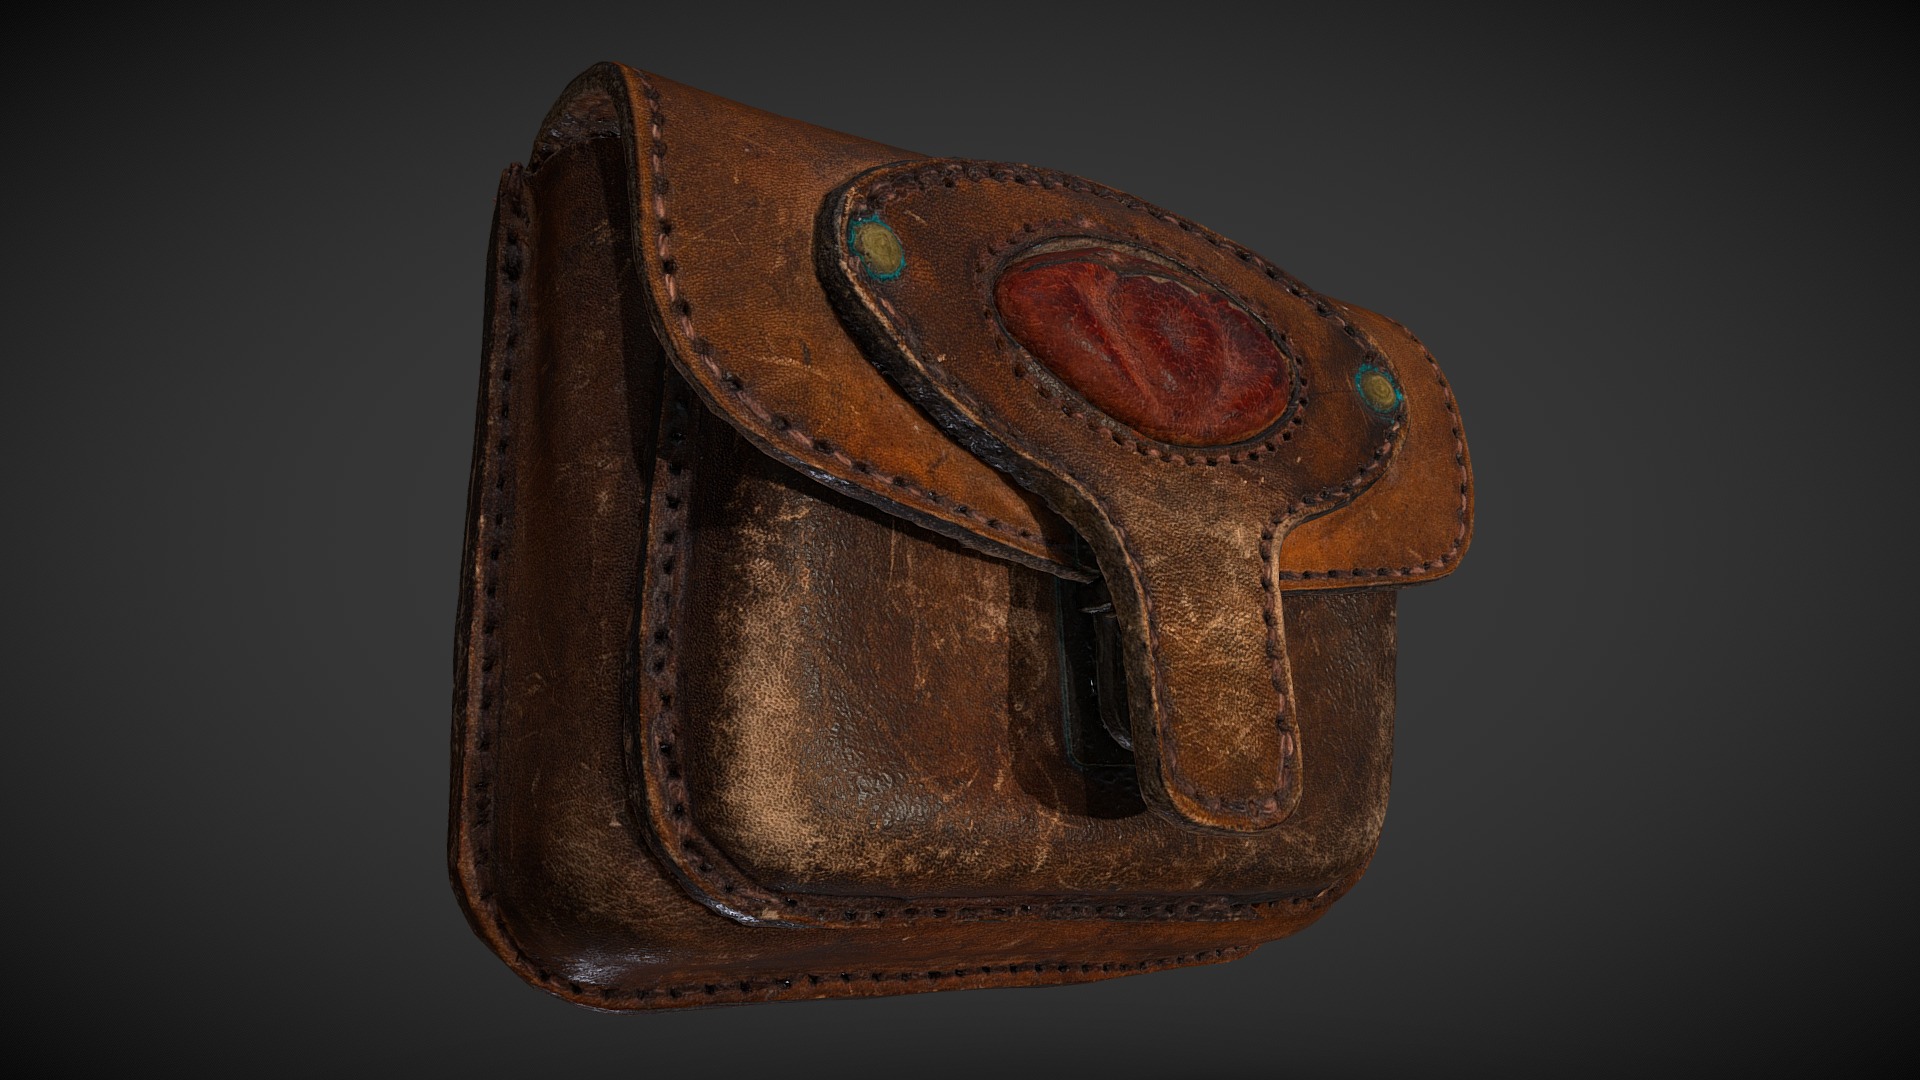 3D model Vintage Leather Belt Bag 3D scan - This is a 3D model of the Vintage Leather Belt Bag 3D scan. The 3D model is about a brown leather wallet.